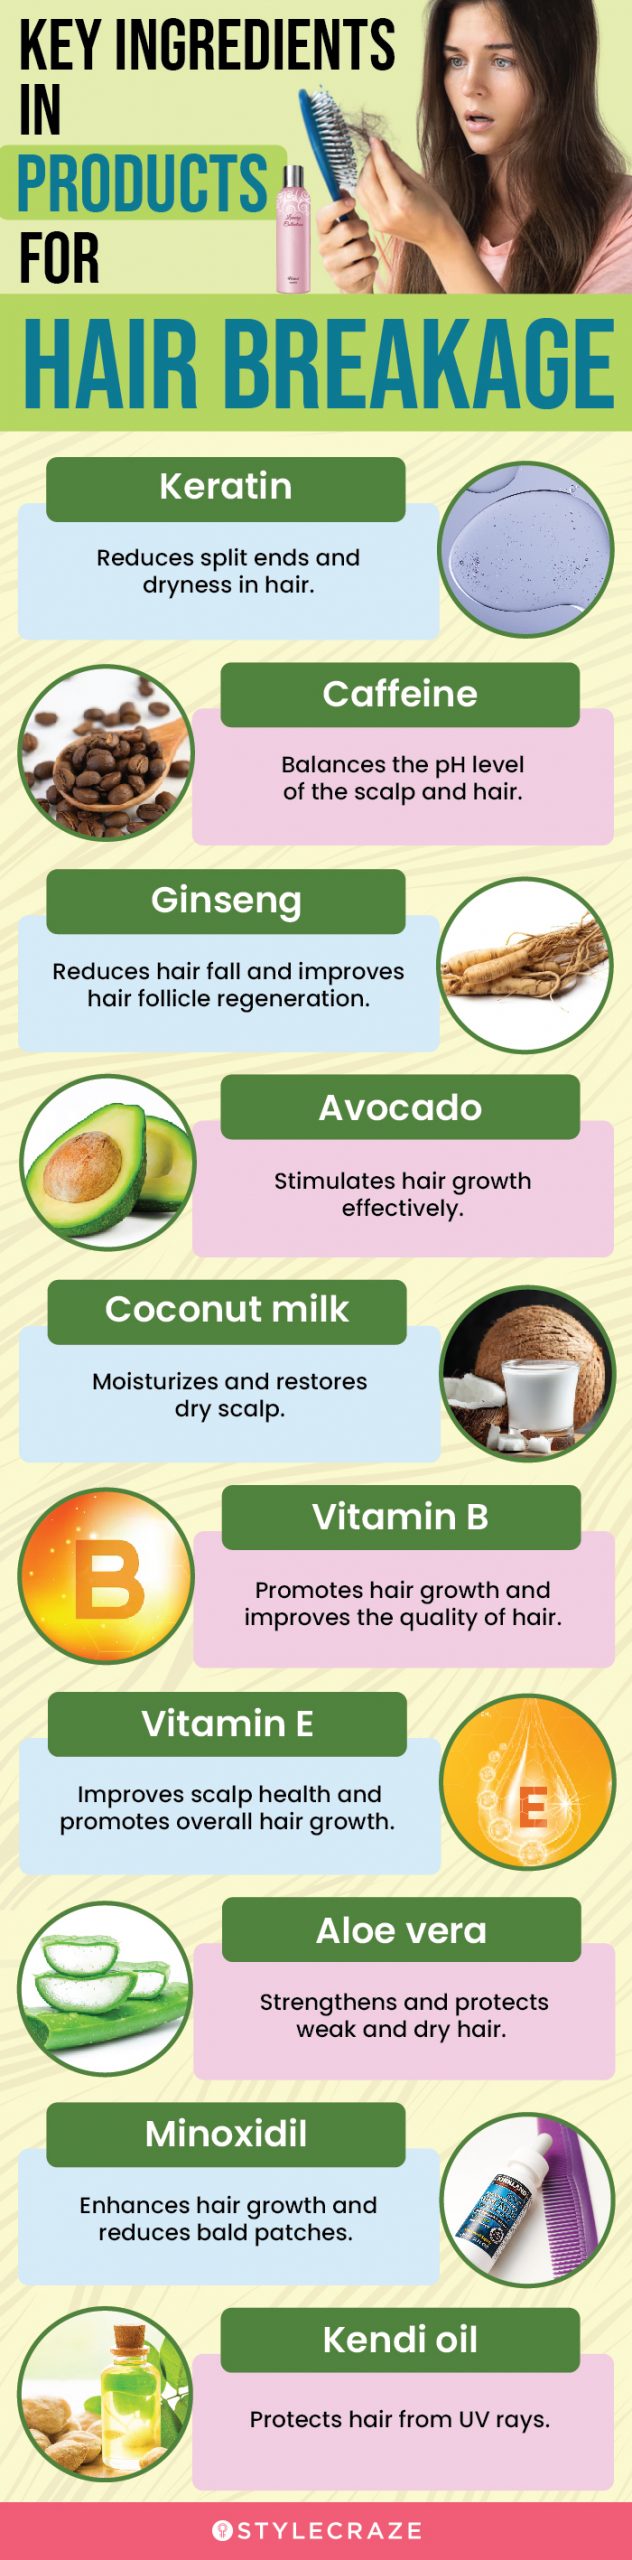 Key Ingredients In Products For Hair Breakage (infographic)